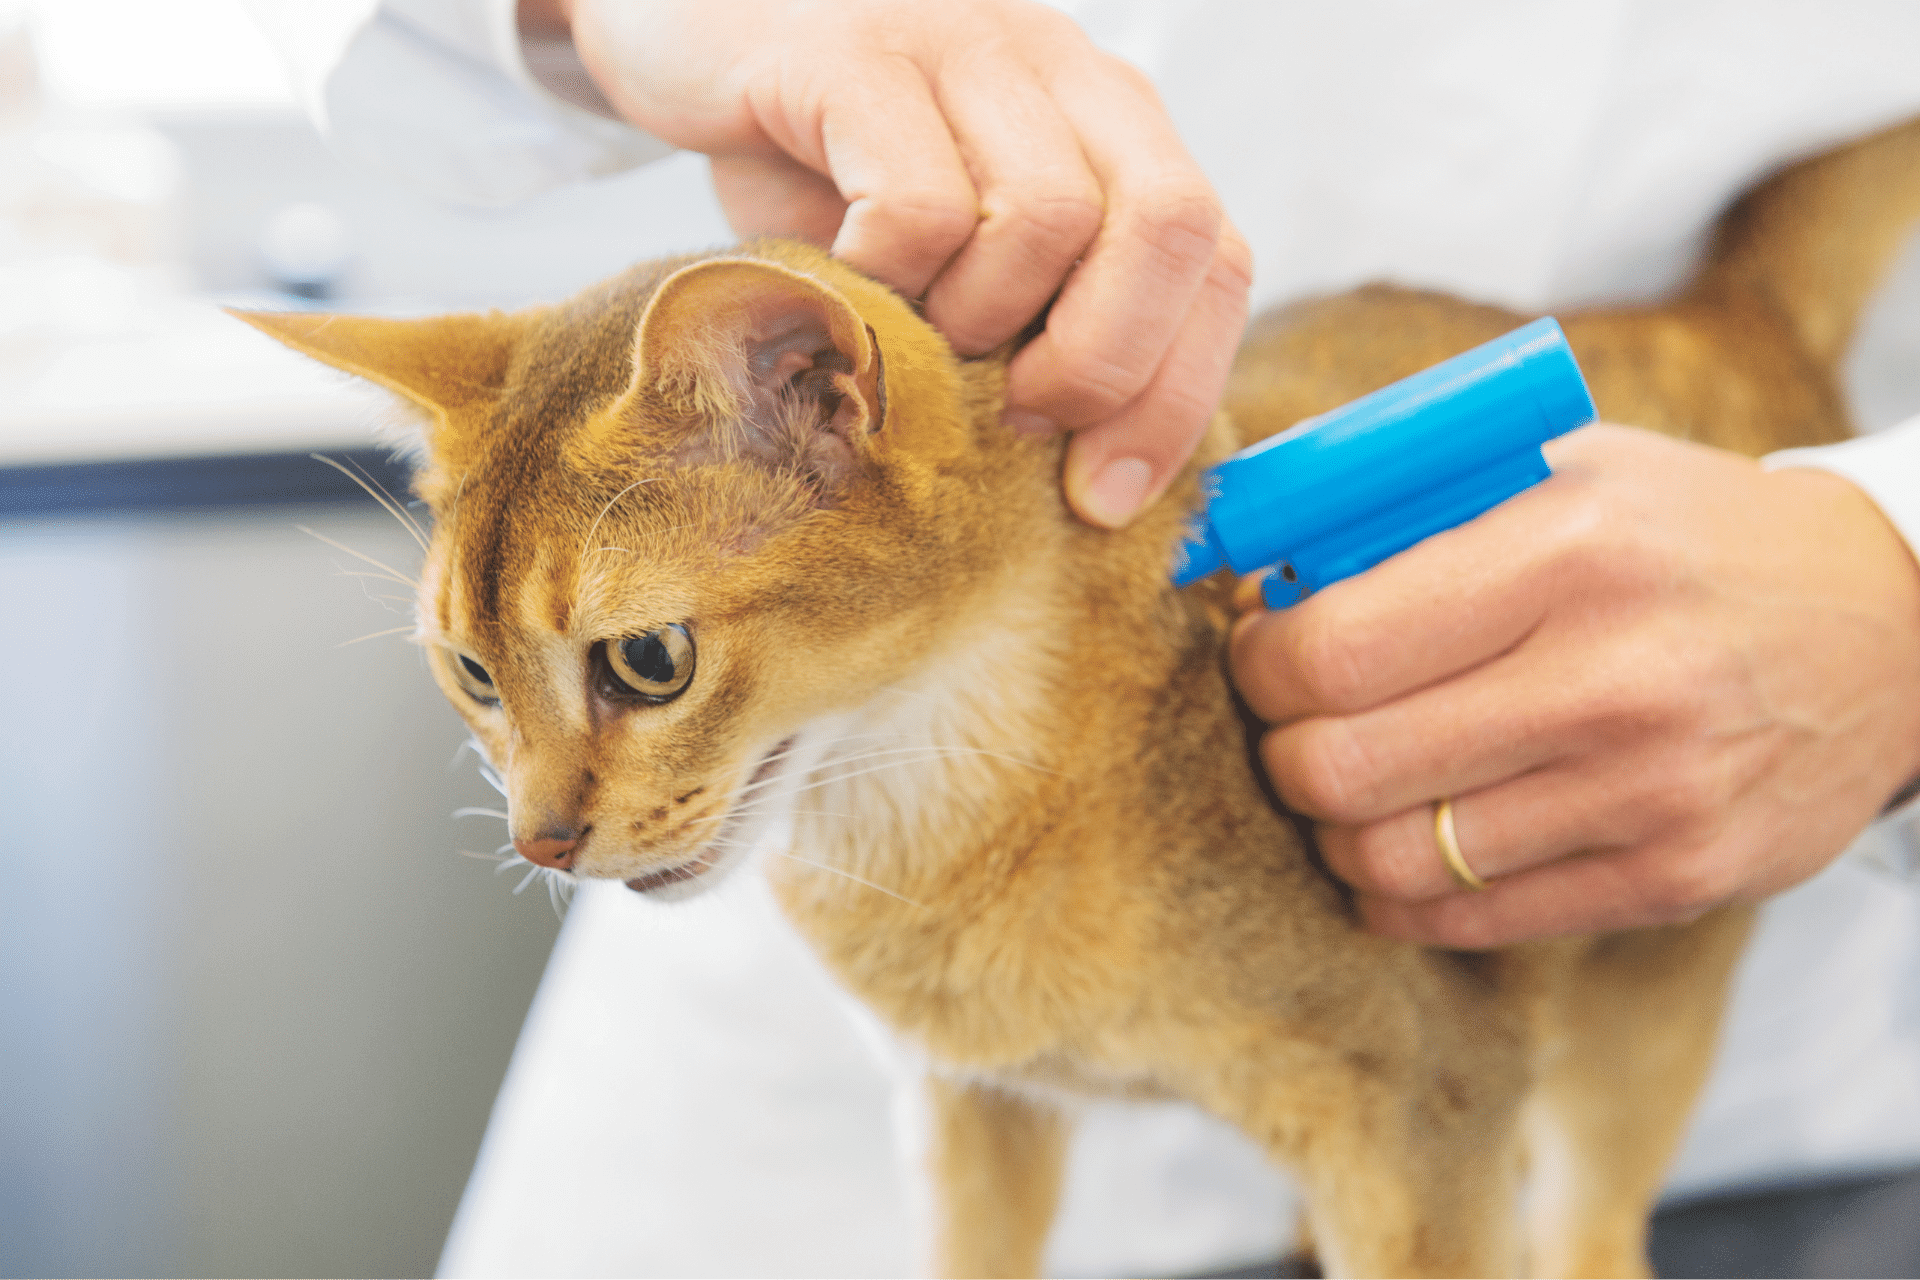 Microchip implant for cat by Vet